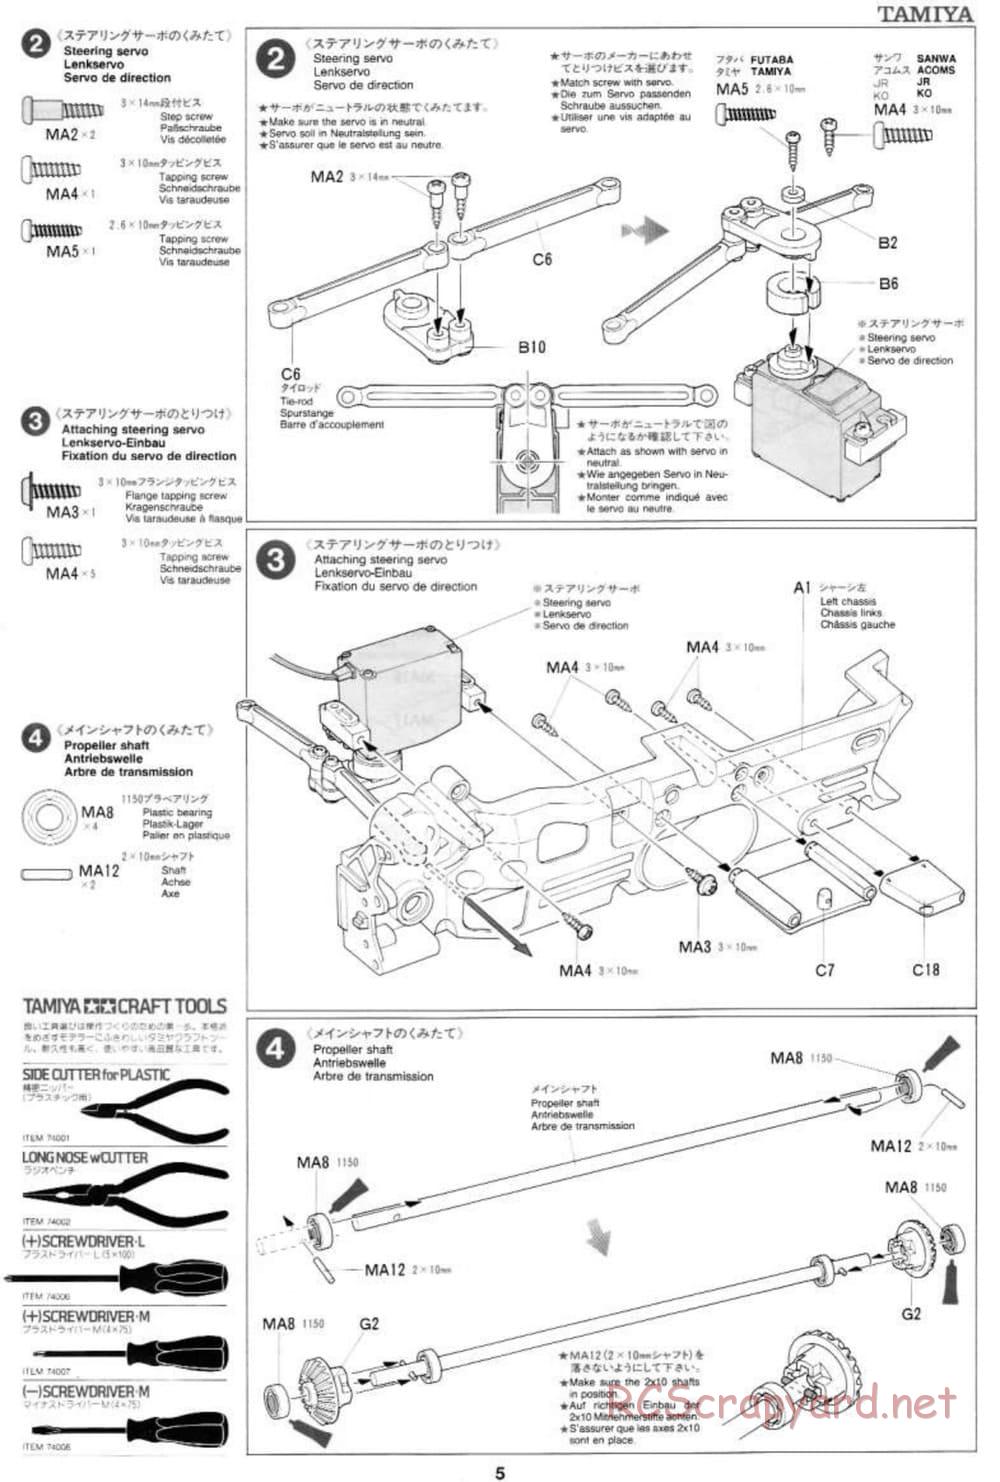 Tamiya - Toyota Celica GT-Four 97 Monte Carlo - TL-01 Chassis - Manual - Page 5